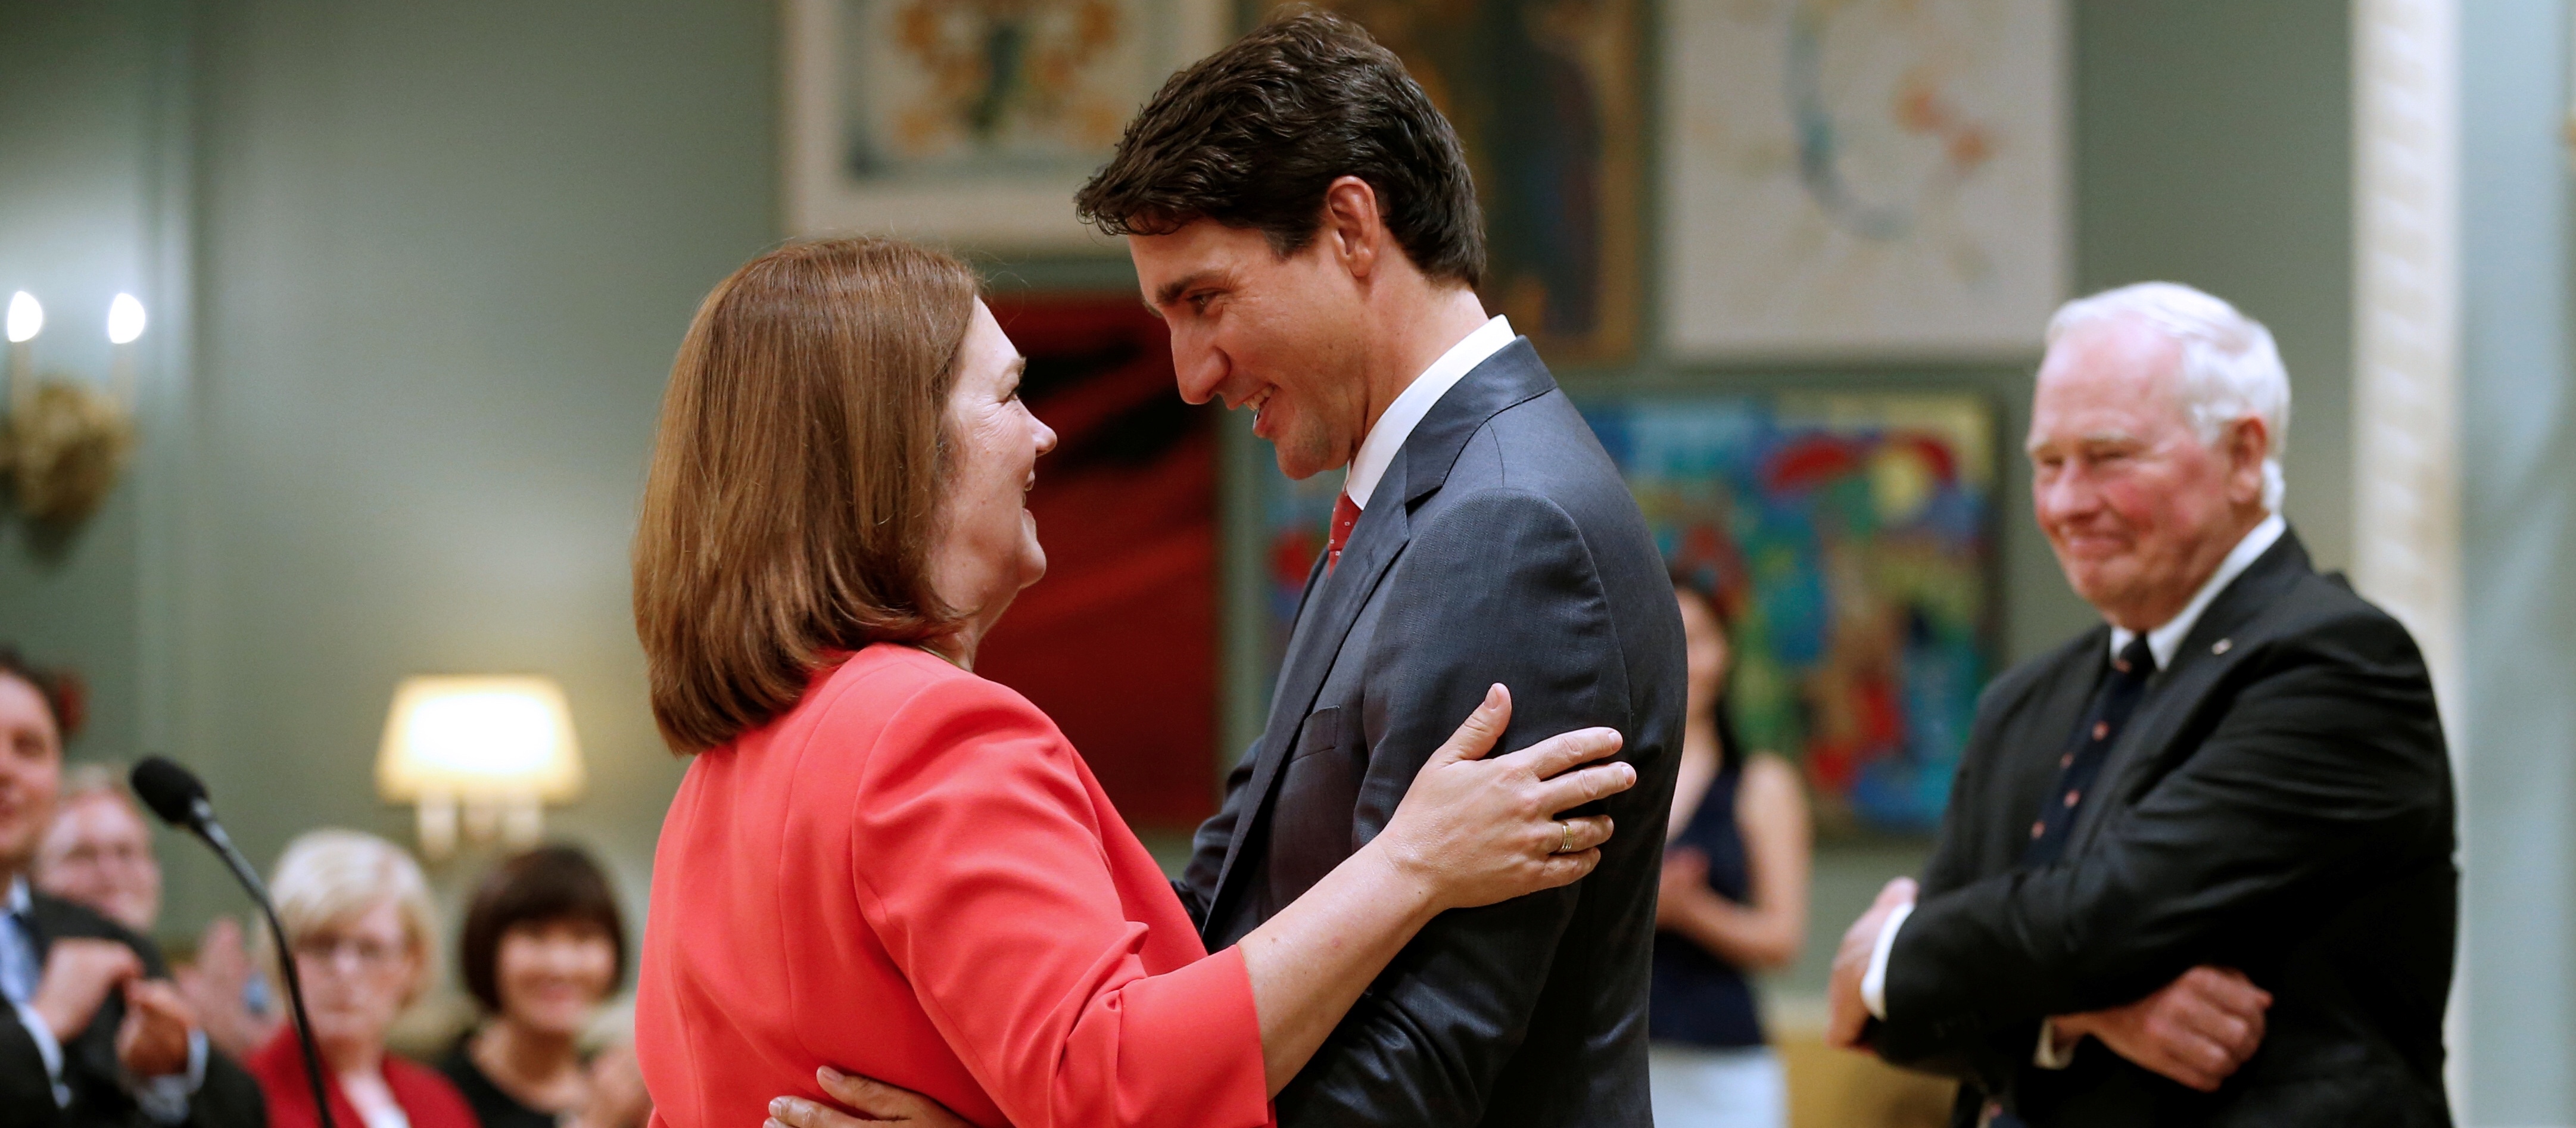 FILE PHOTO: Canada's Prime Minister Justin Trudeau (R) congratulates Jane Philpott after she was sworn-in as Canada's Minister of Indigenous Services during a cabinet shuffle at Rideau Hall in Ottawa, Ontario, Canada, August 28, 2017. REUTERS/Chris Wattie/File Photo